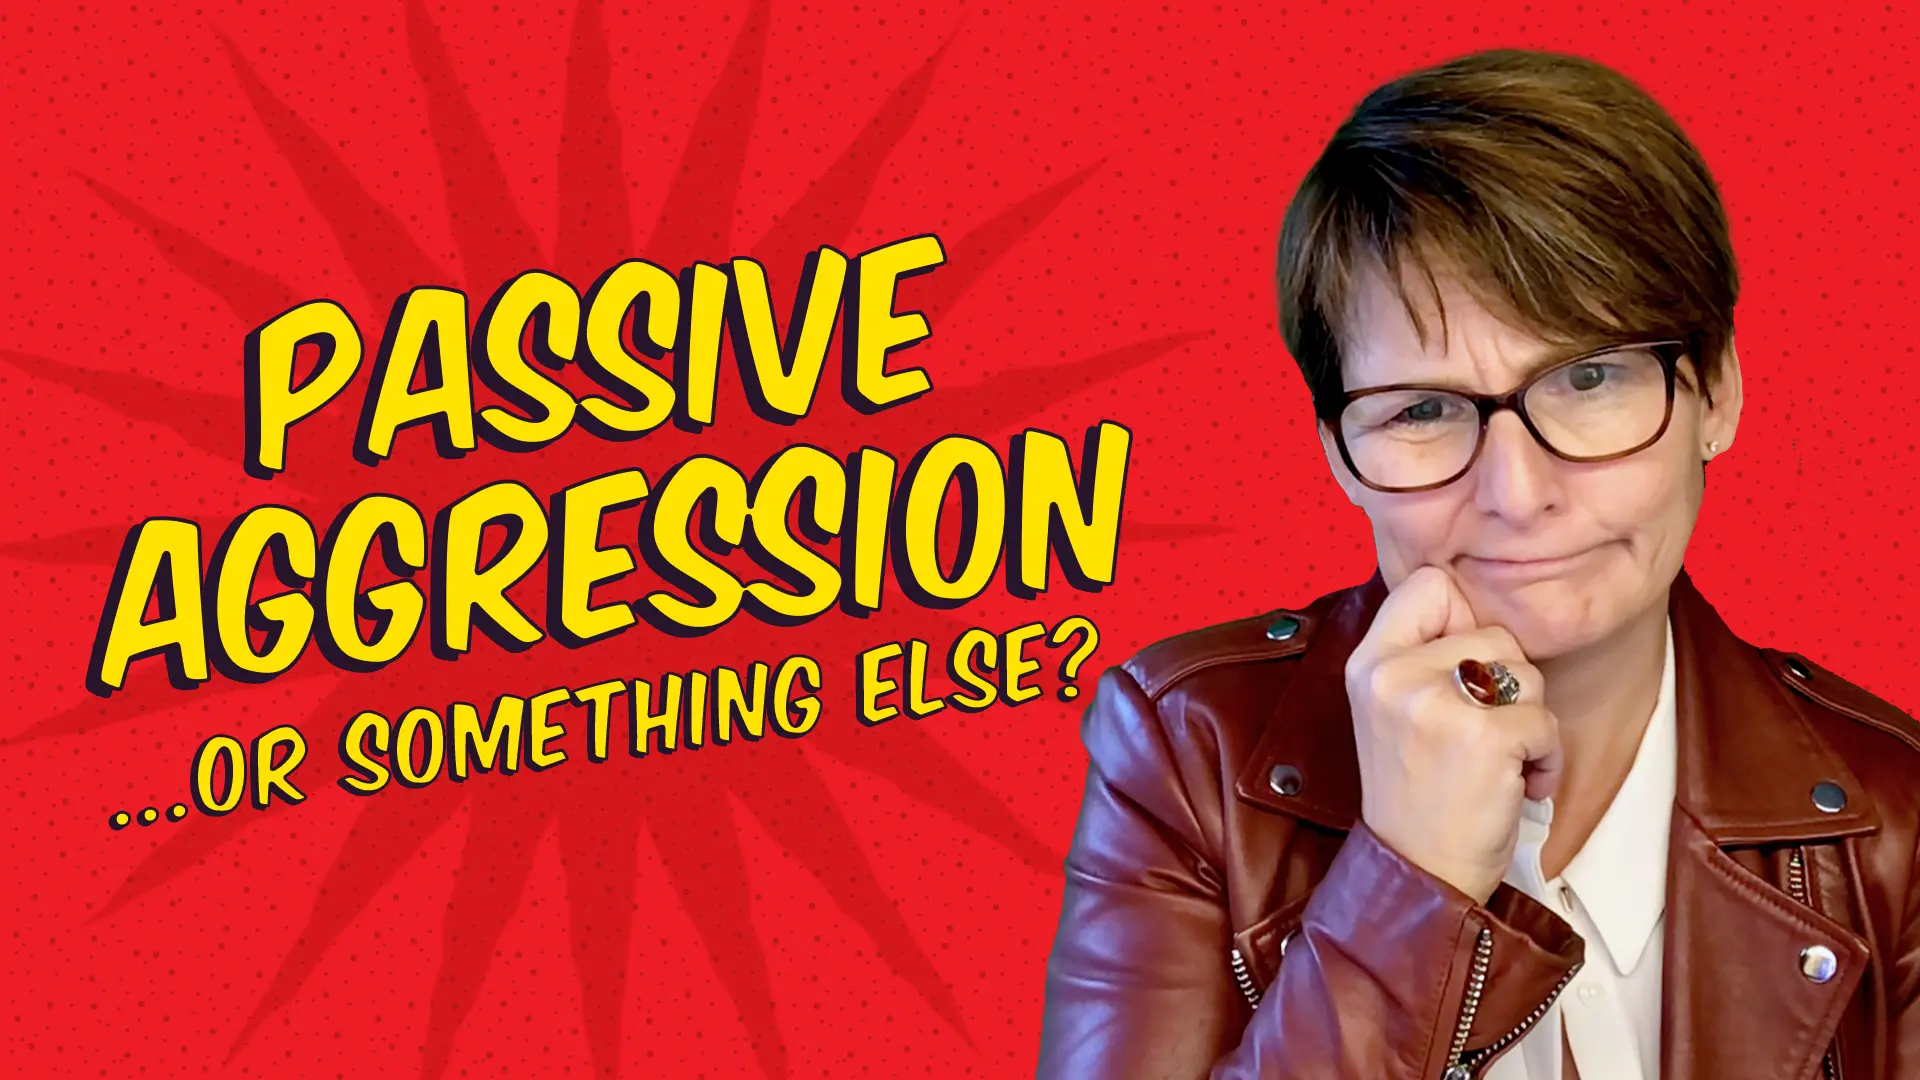 Passive Aggression...or Something Else? with Liane Davey